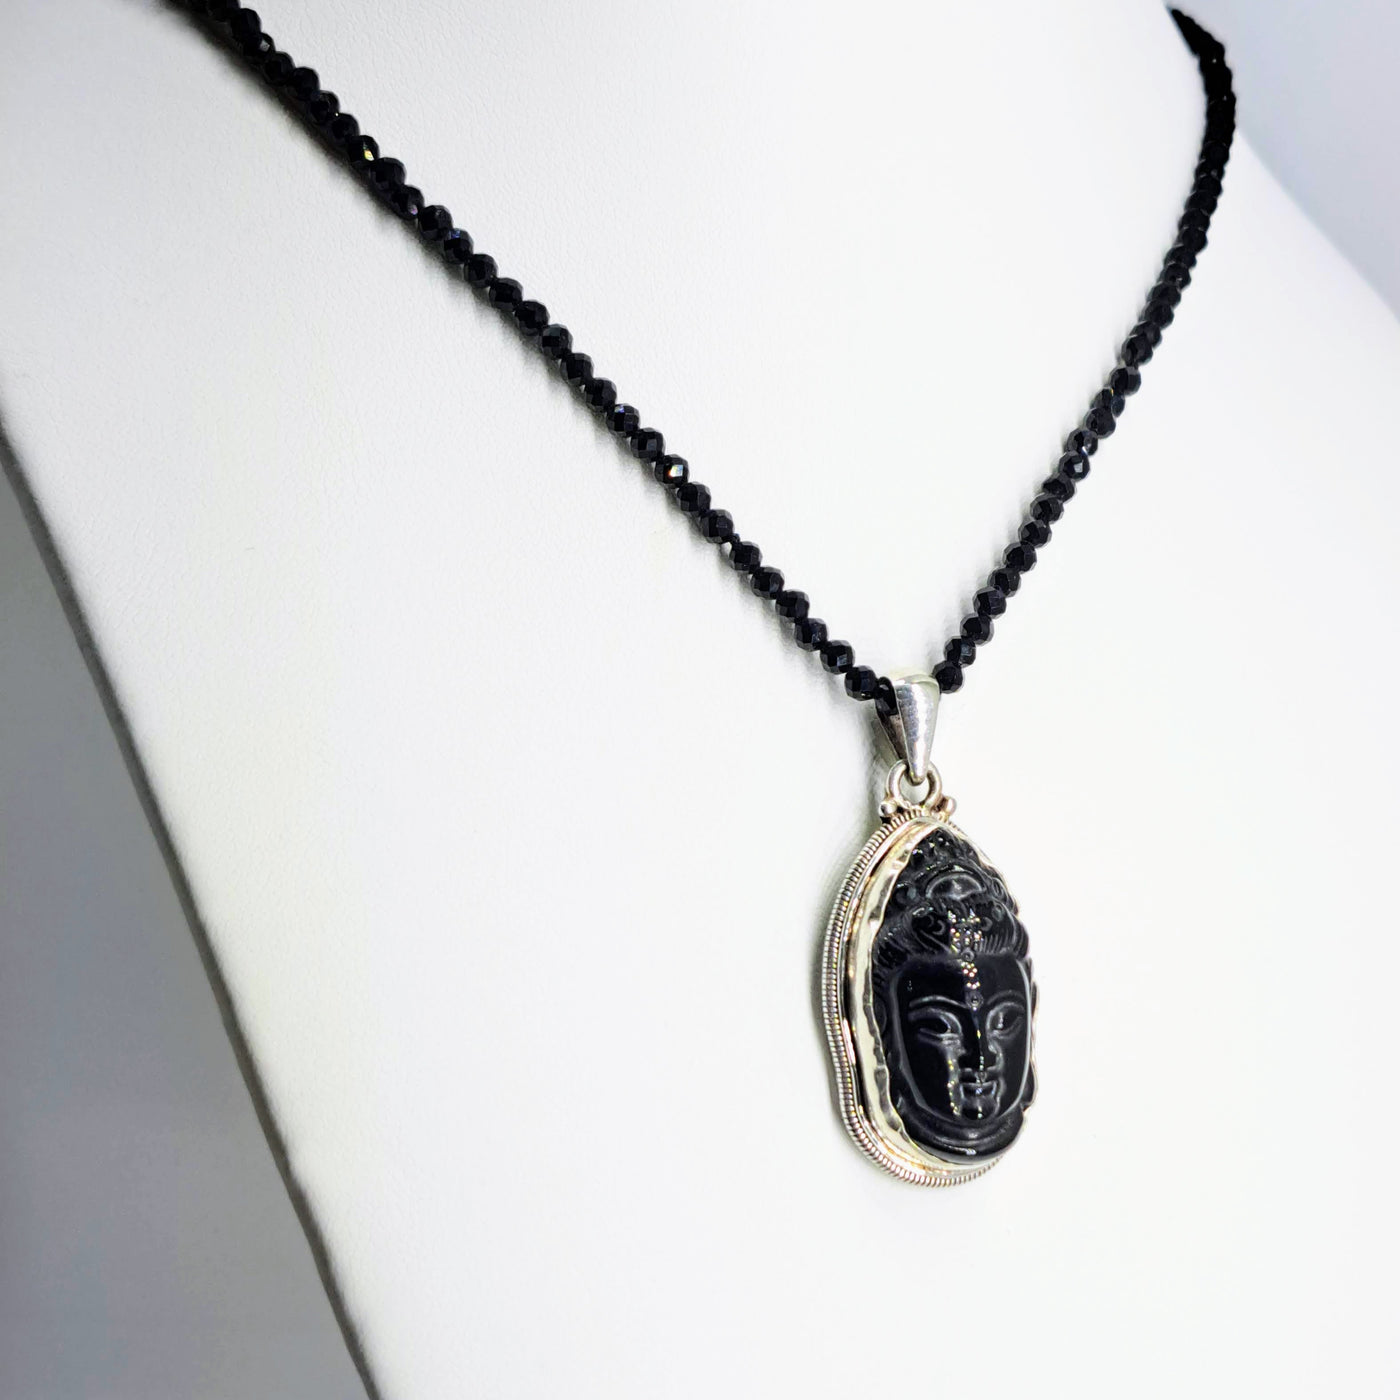 "Quan Yin" Pendant Necklace - Obsidian, Spinel, Sterling.